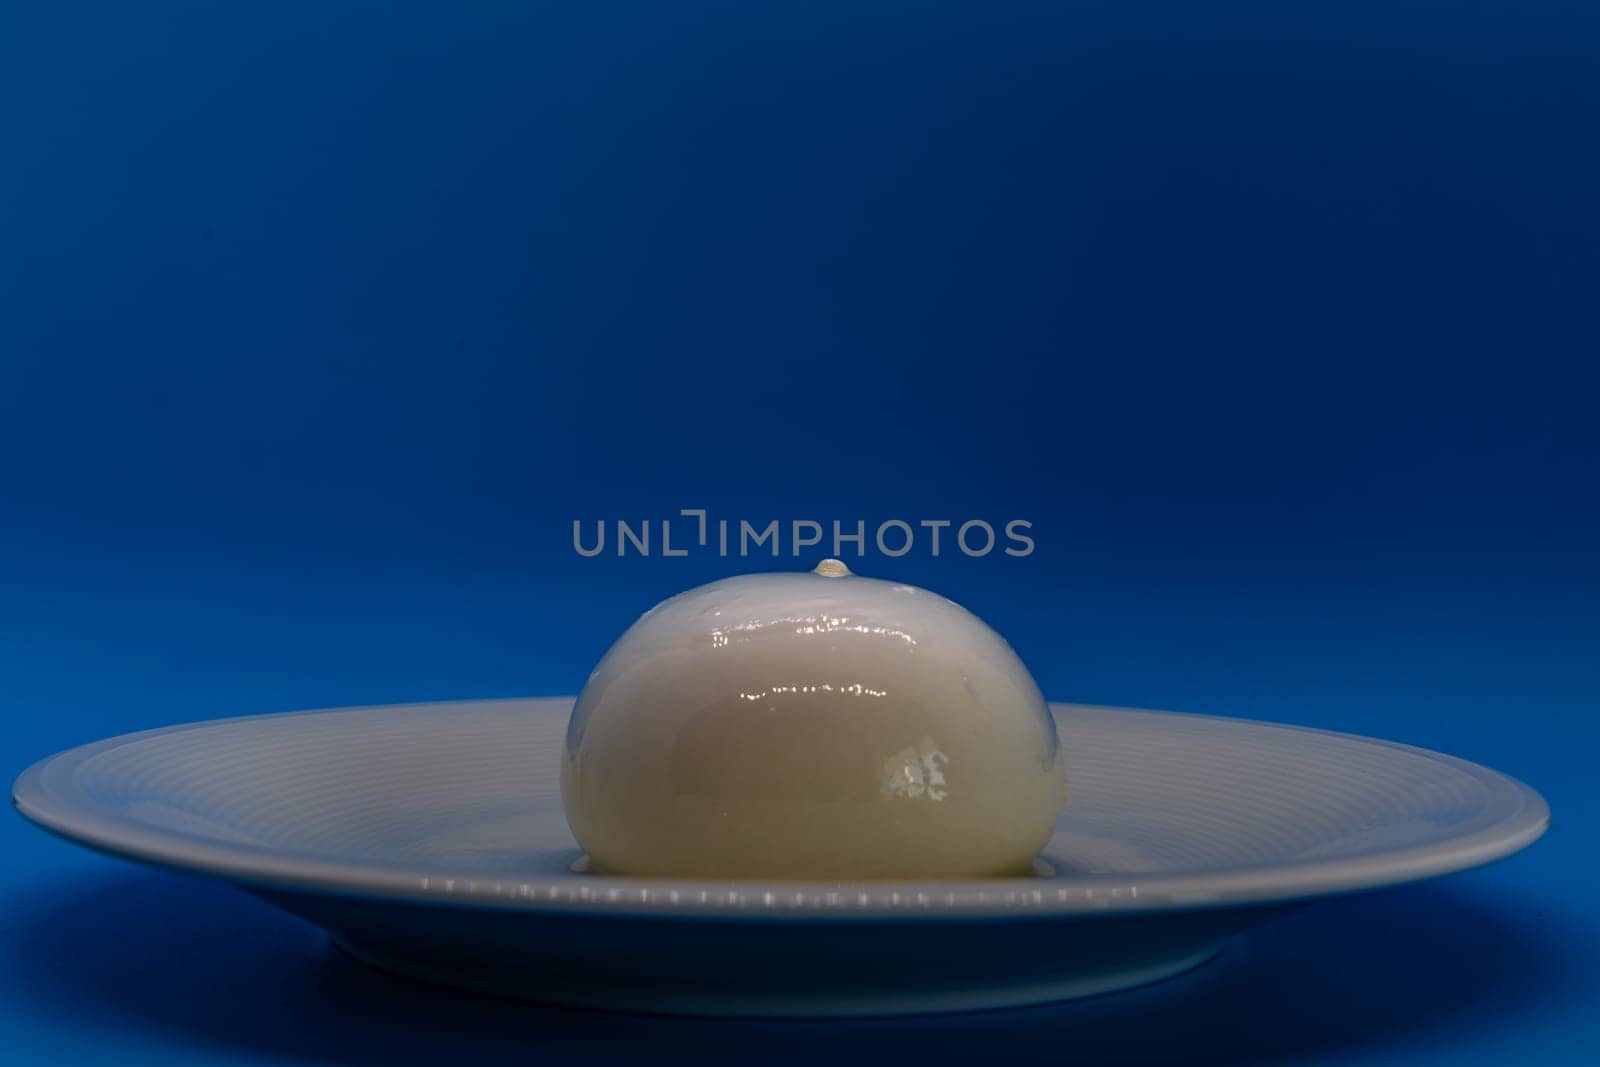 A burrata cheese rests delicately on a white plate against a vivid blue background.